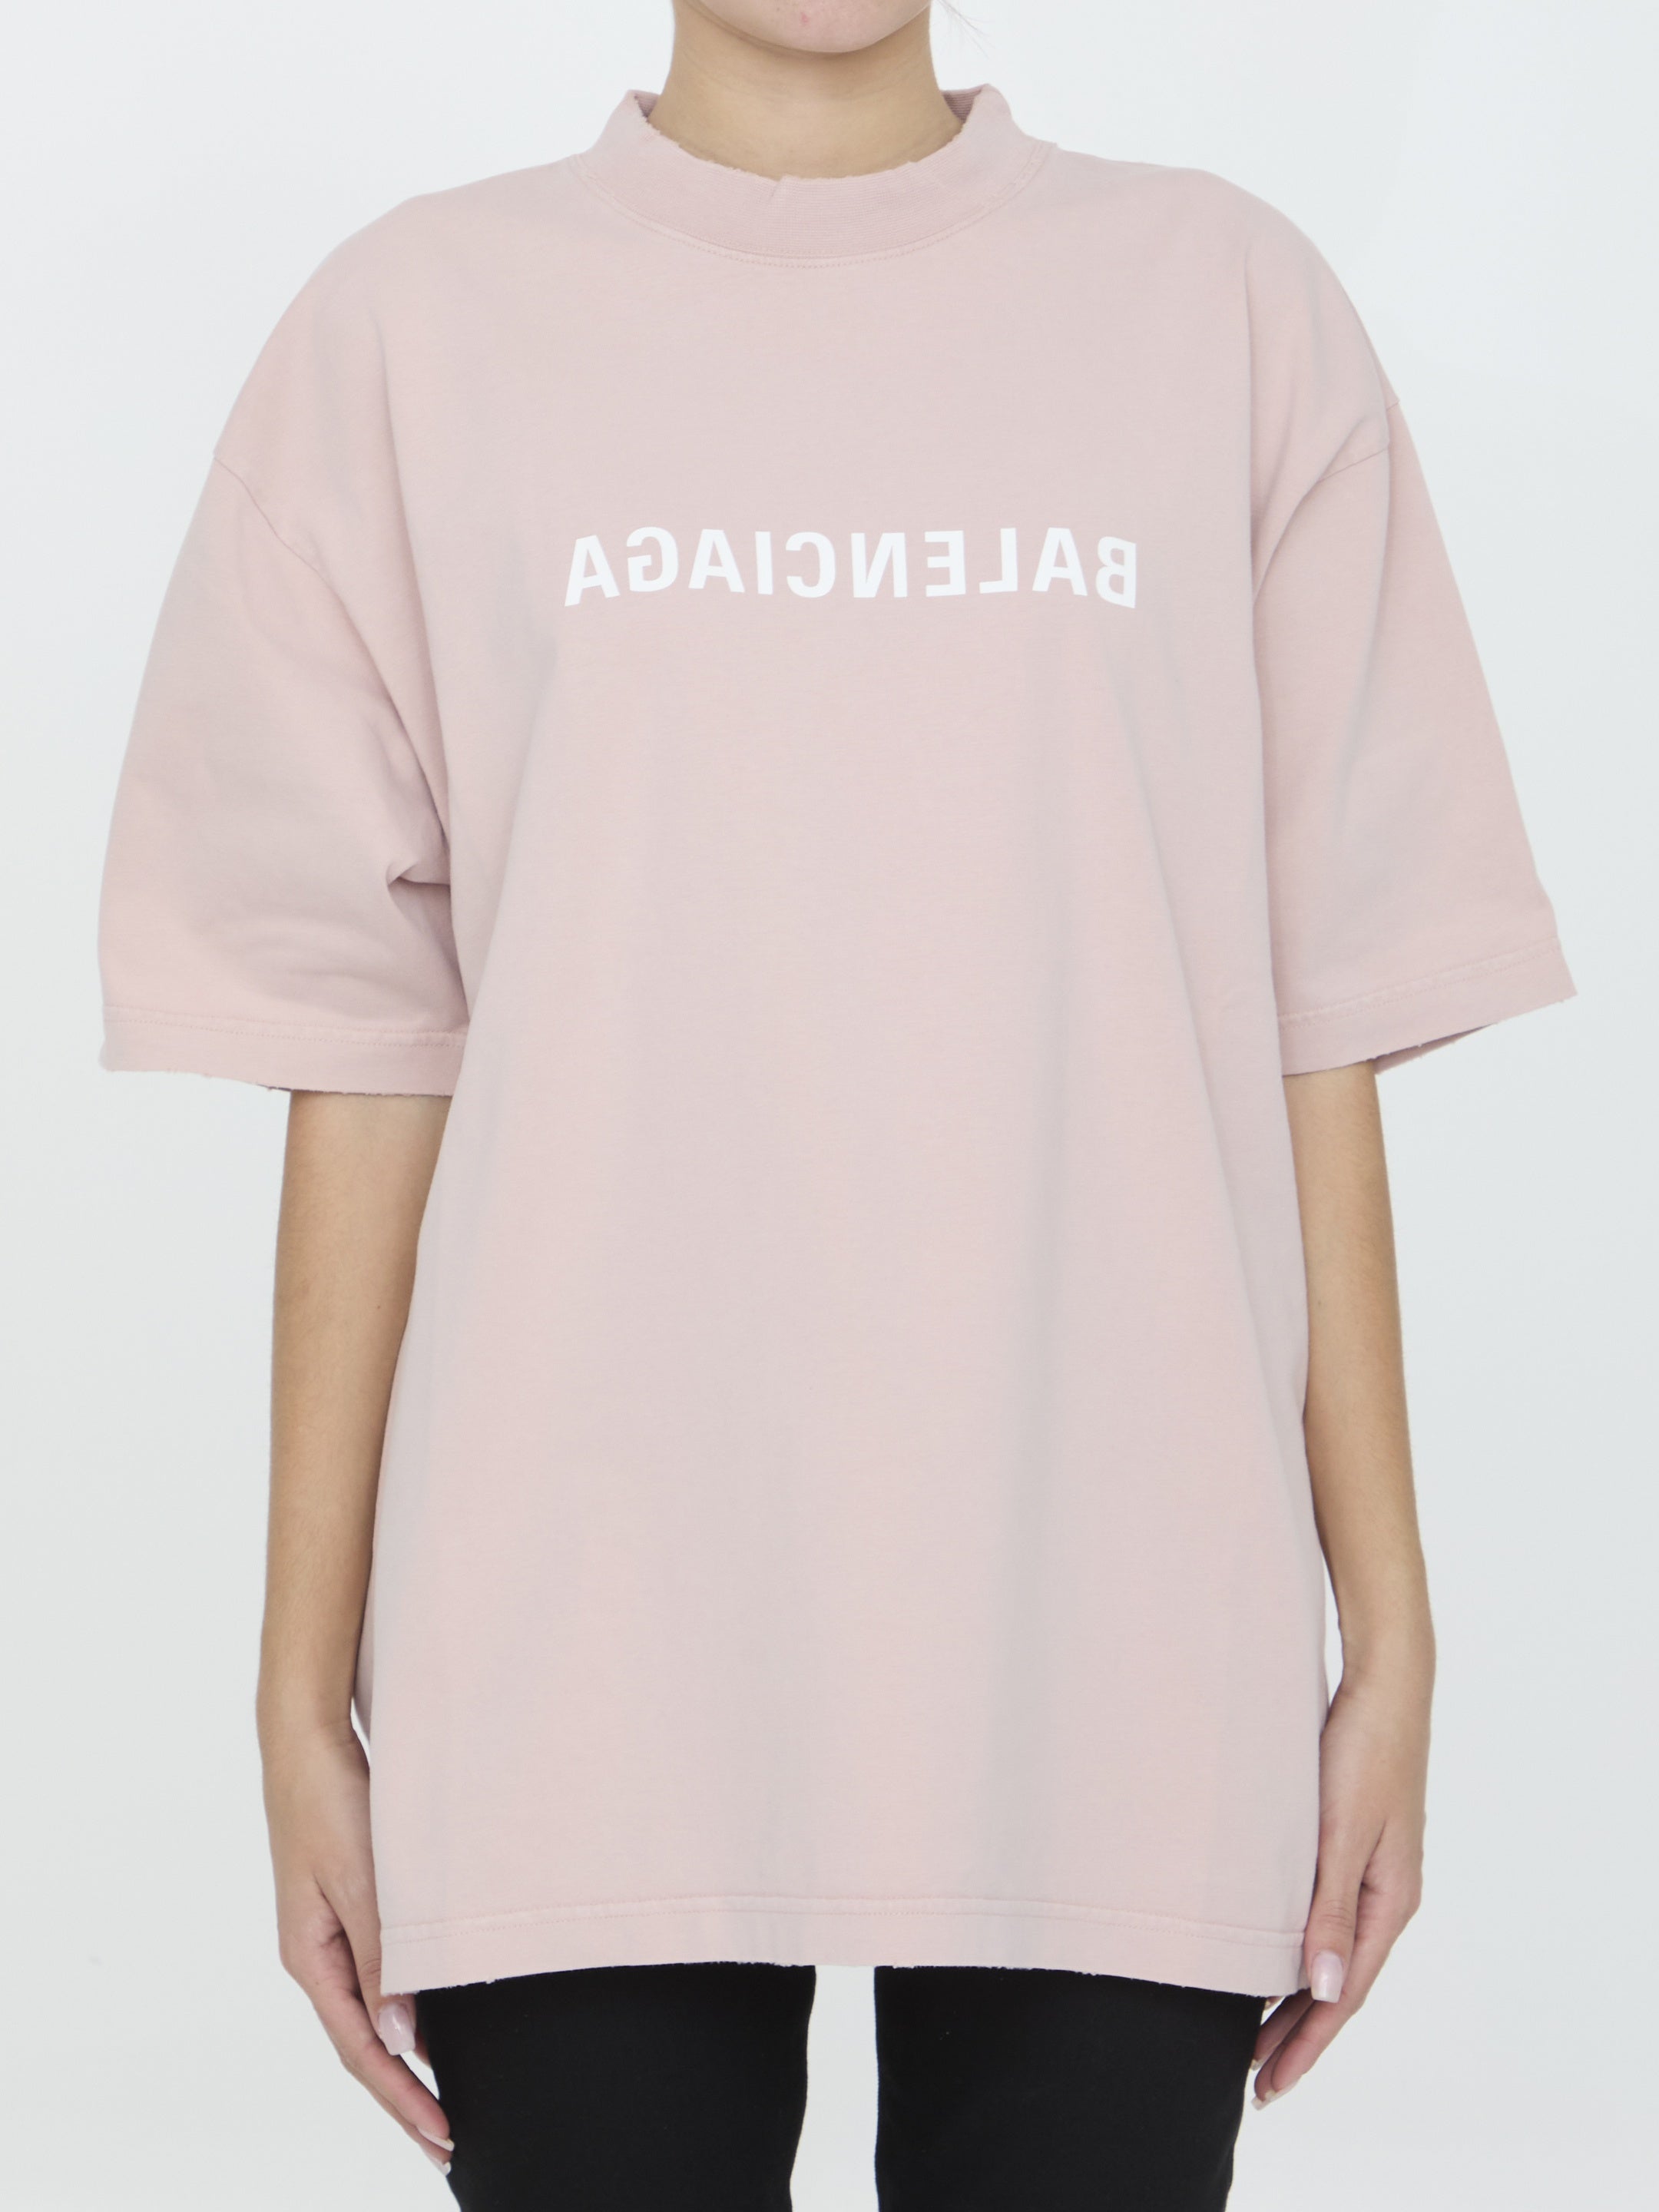 BALENCIAGA-OUTLET-SALE-Back-Flip-t-shirt-Shirts-S-PINK-ARCHIVE-COLLECTION.jpg